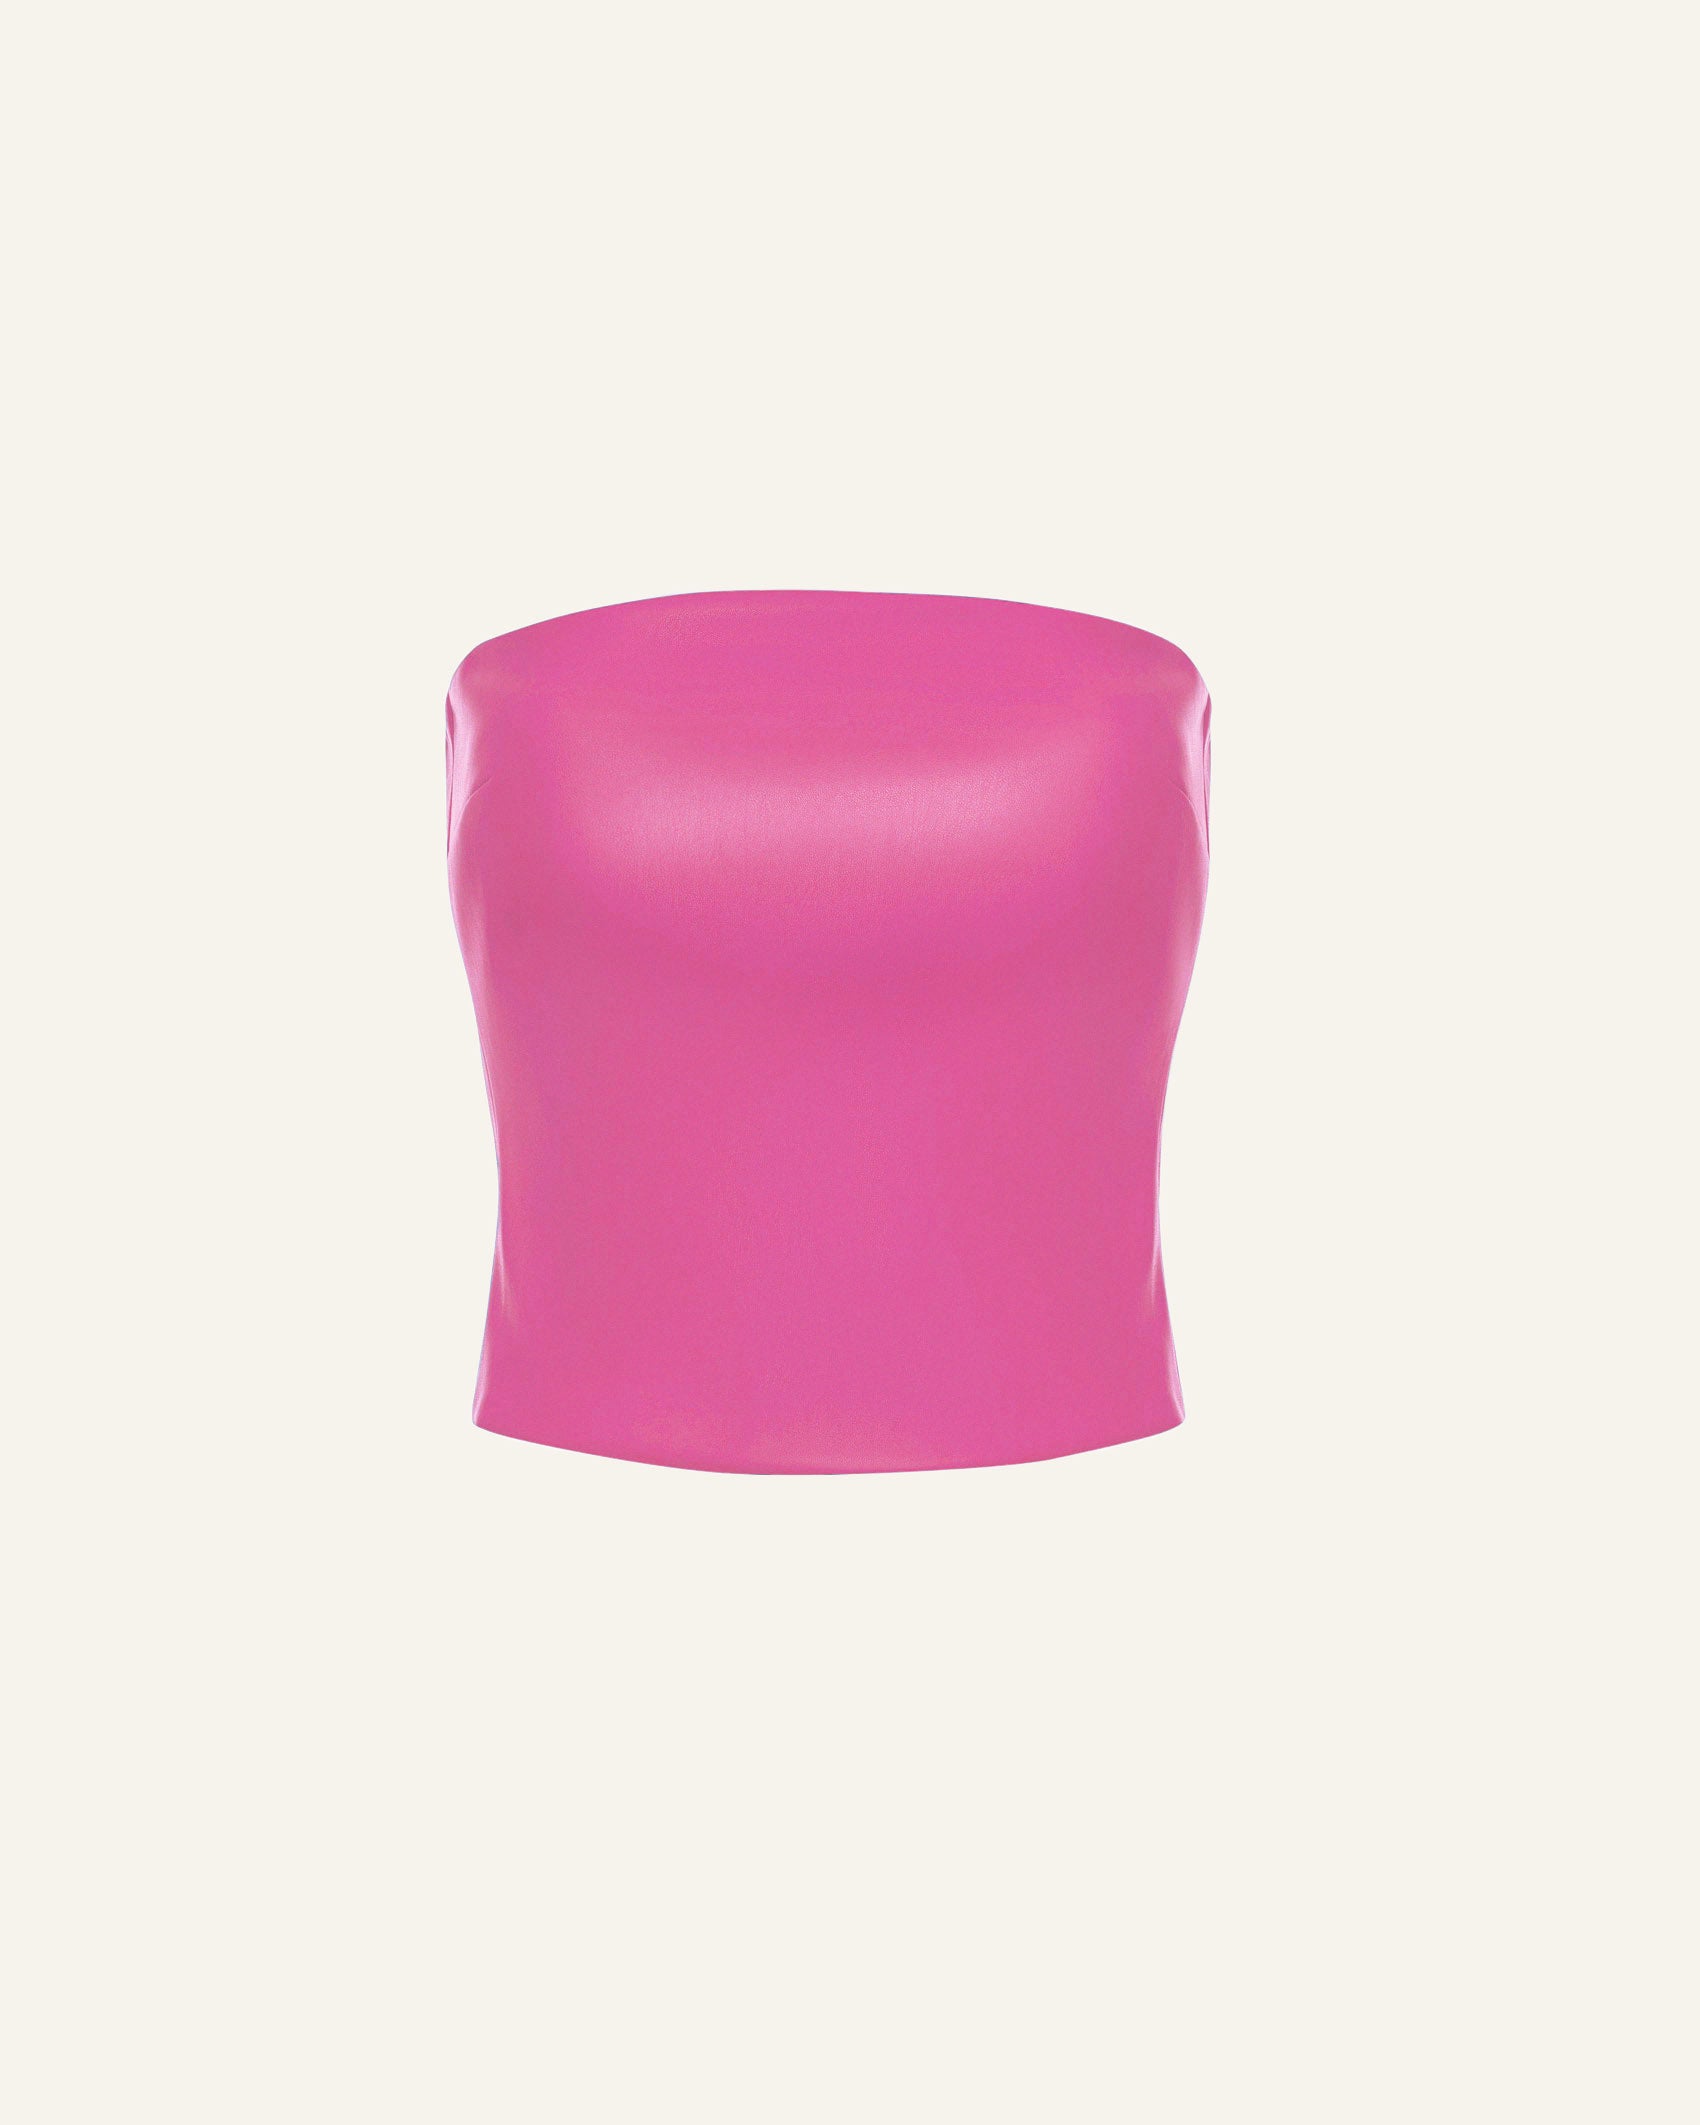 Product photo of a pink vegan leather tube top